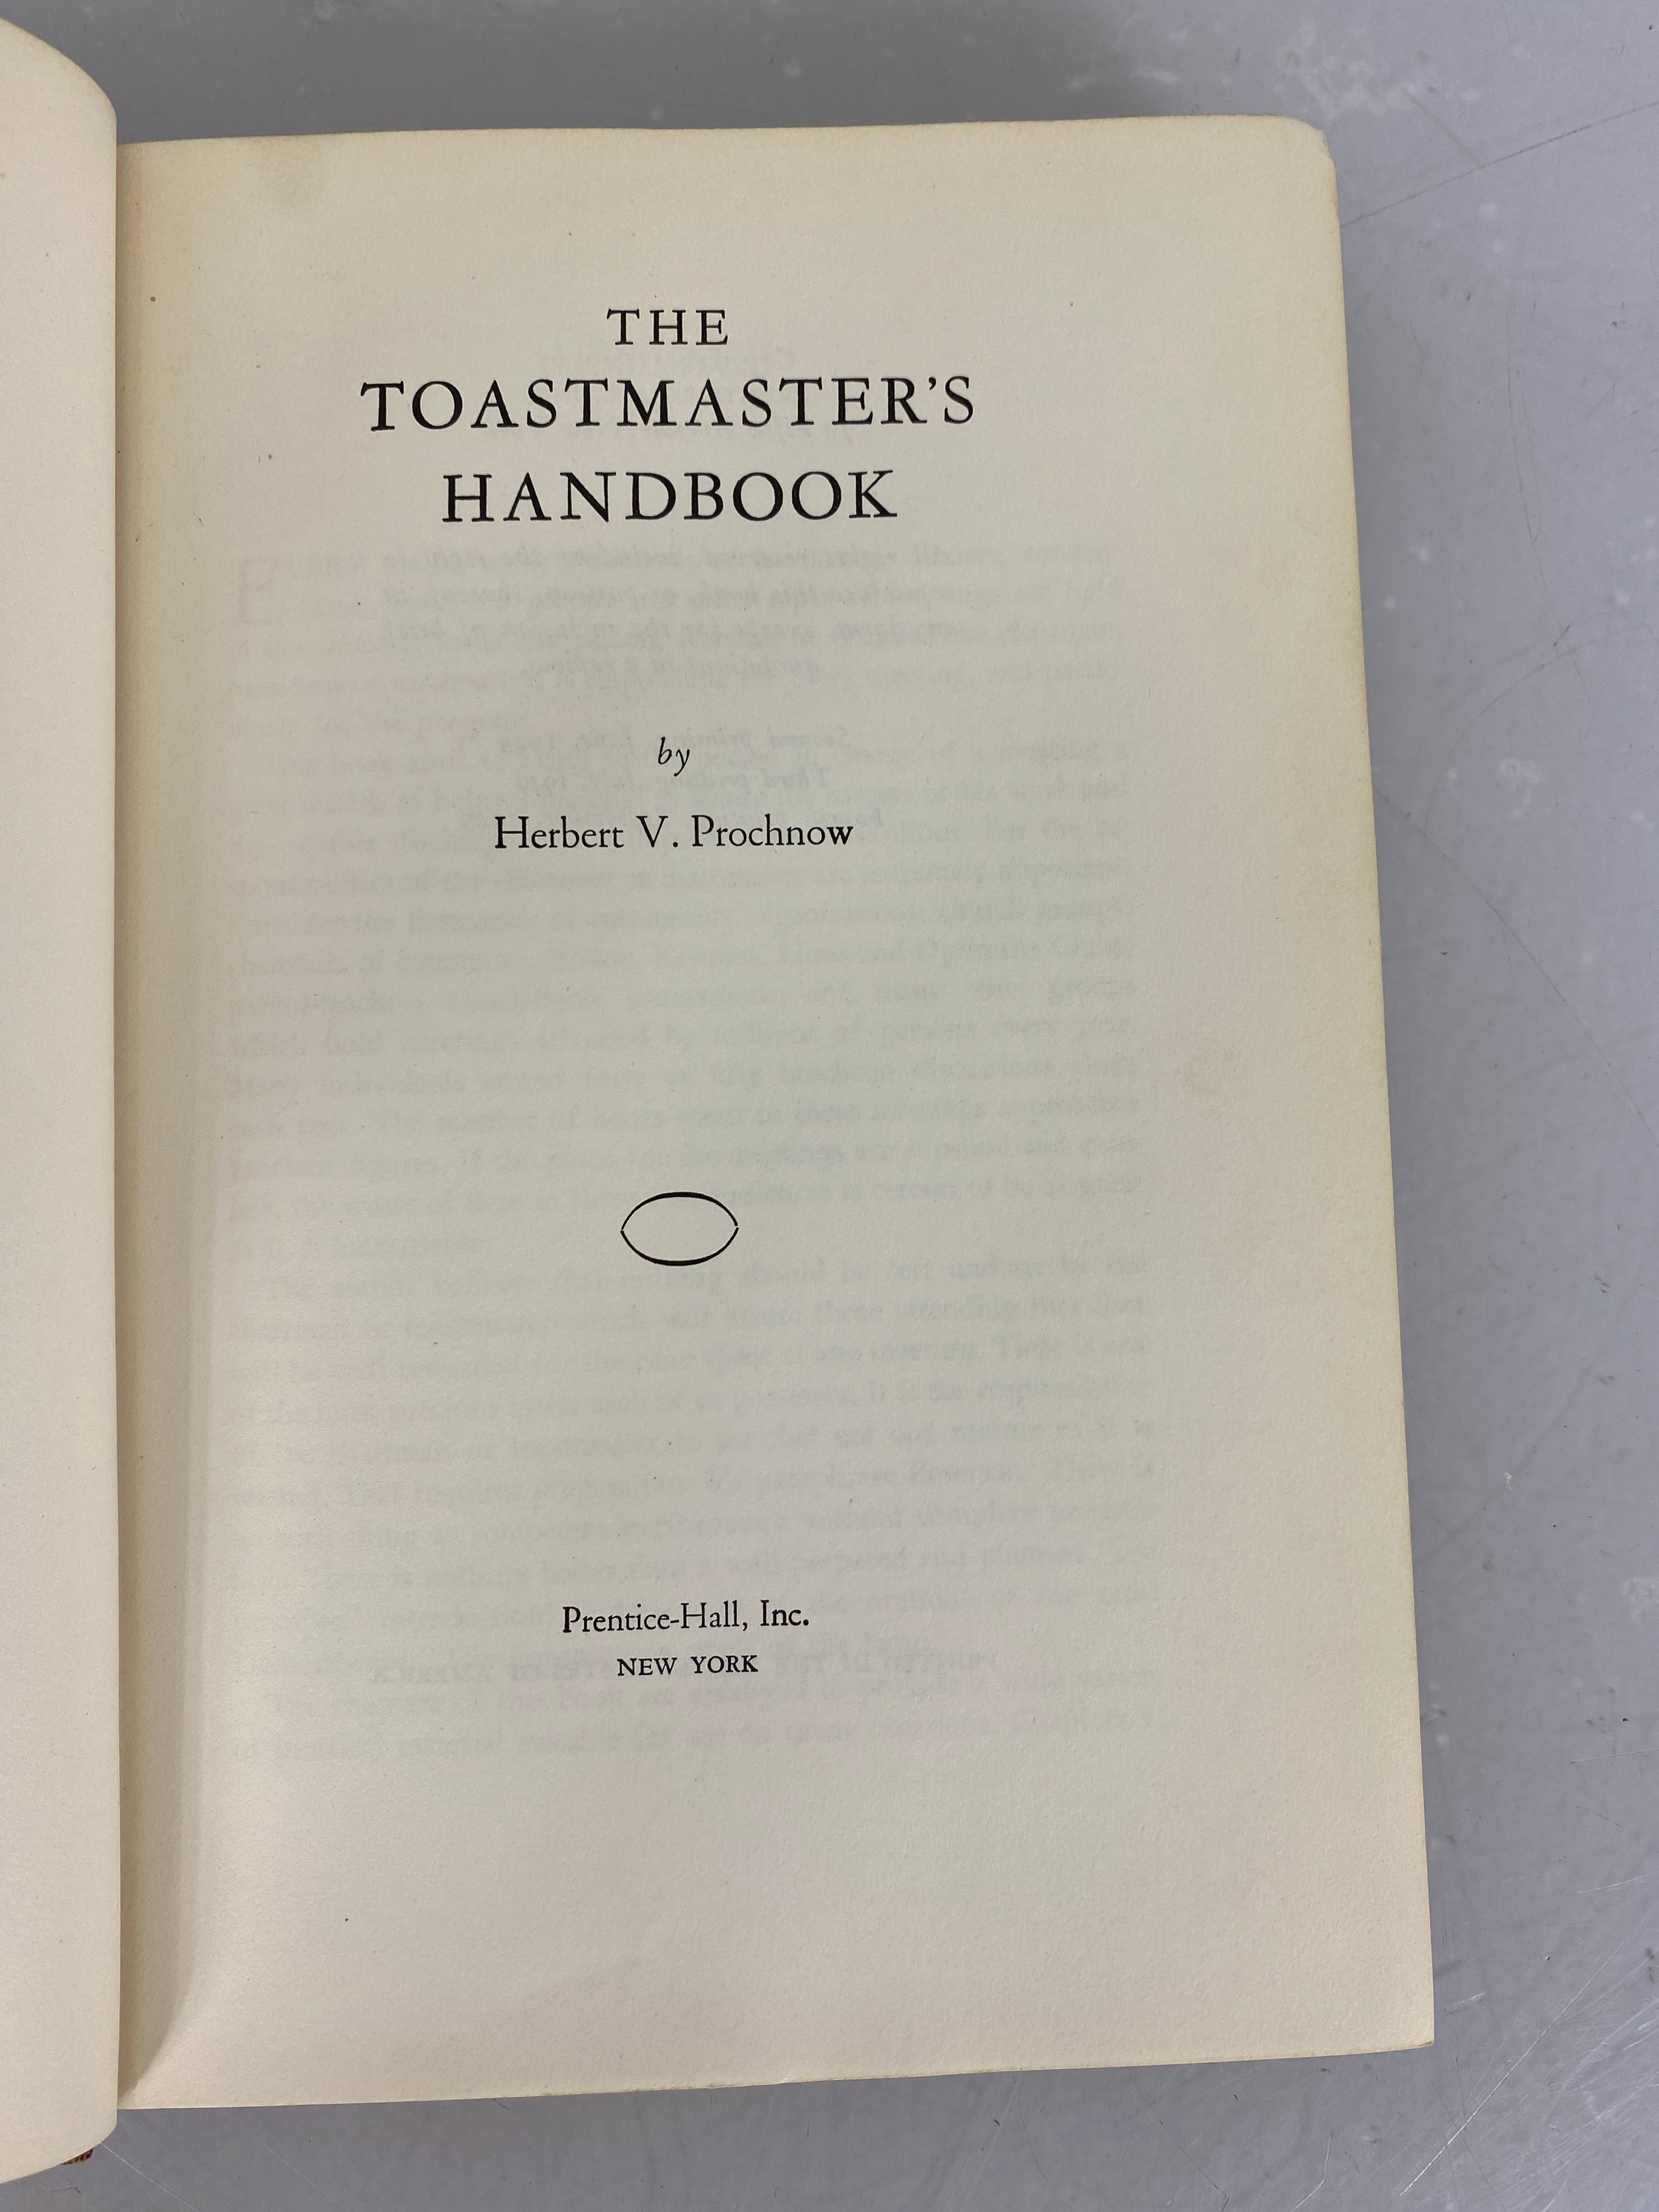 Lot of 2 Communication Books: The Toastmaster's Handbook 1949 HC DJ, Oral Communication Message and Response 1969 SC